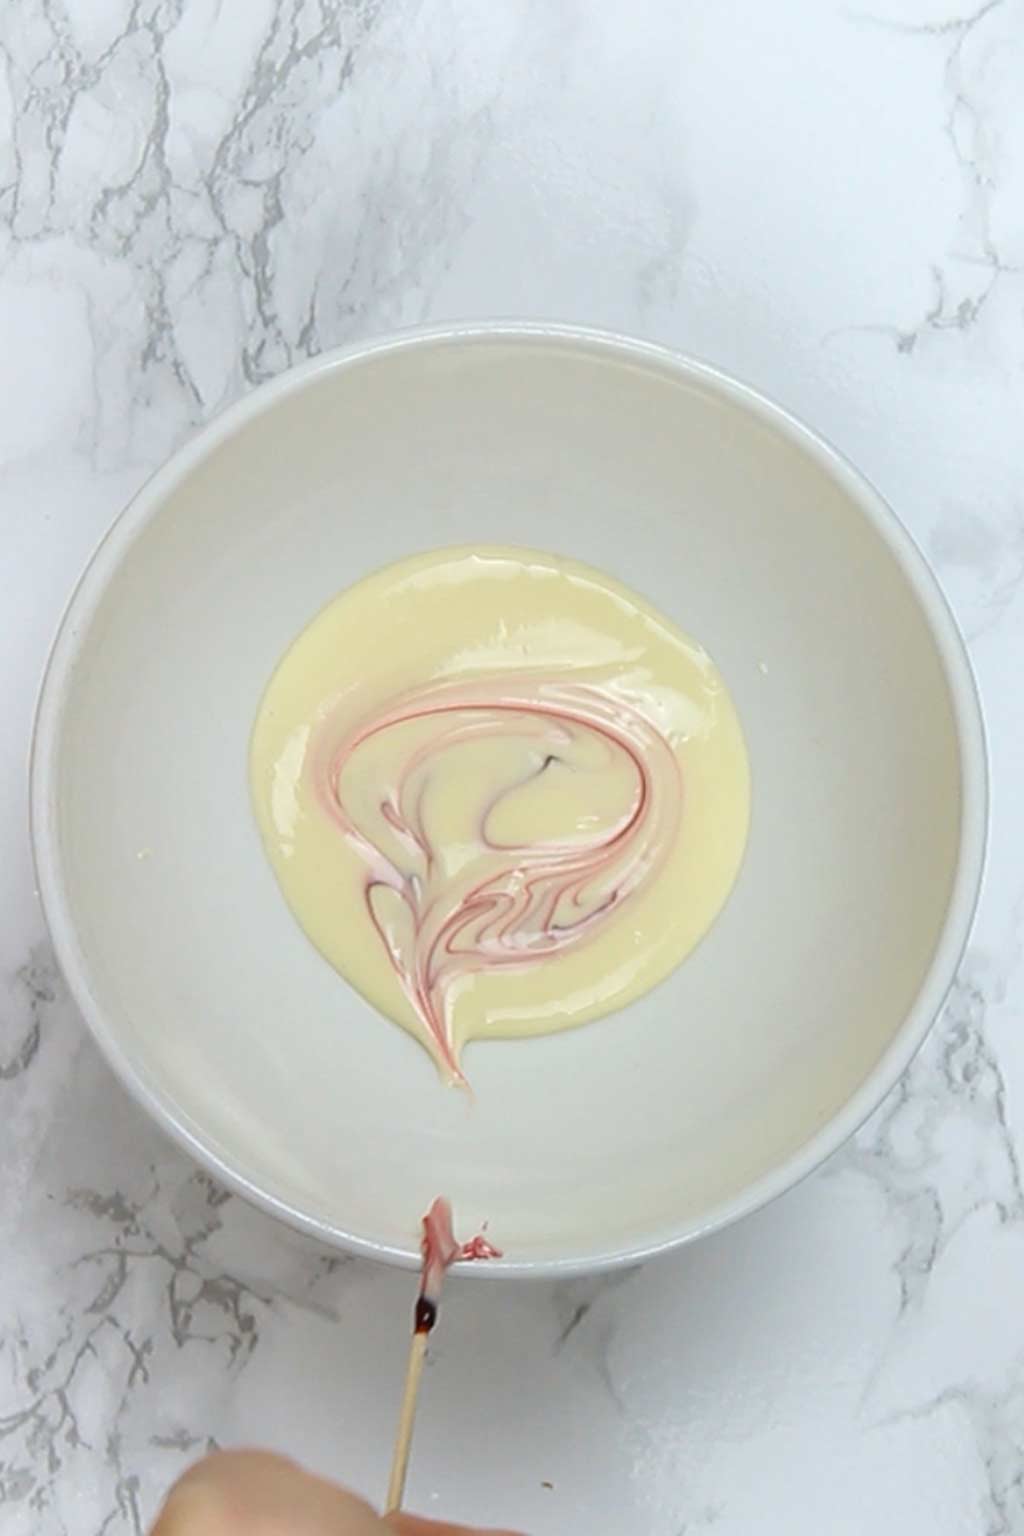 adding pink food gel to white chocolate using a toothpick